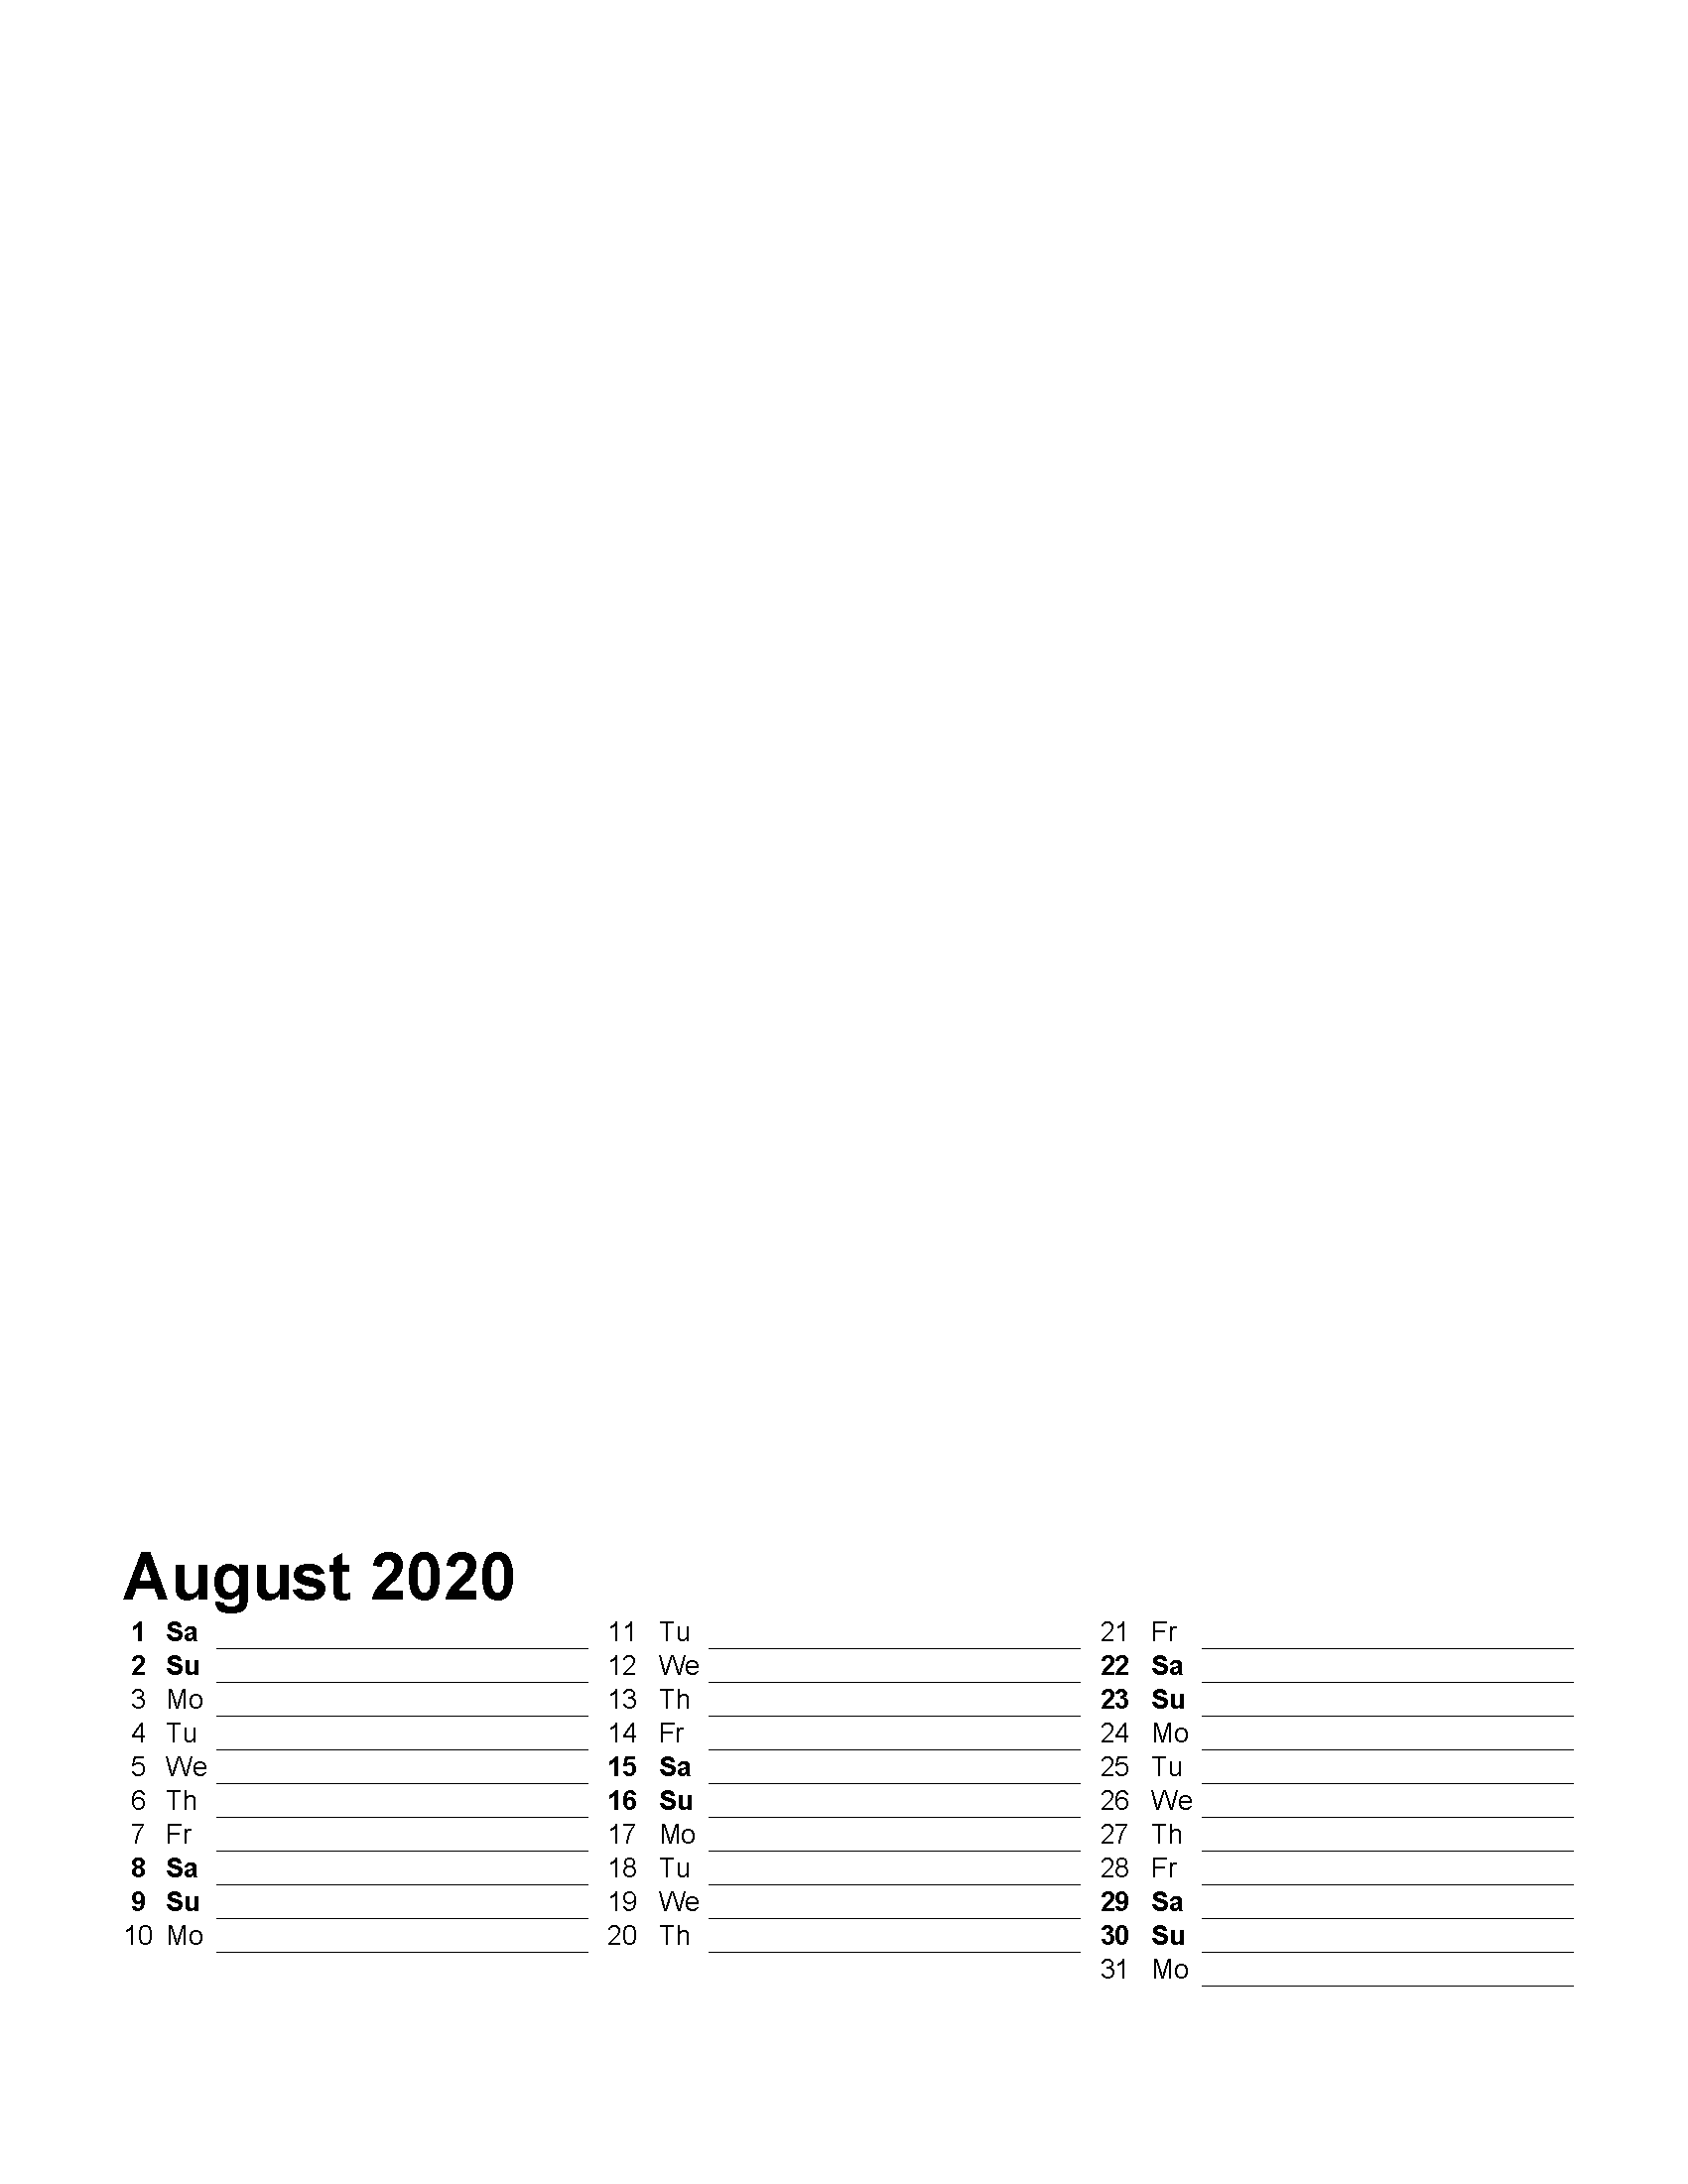 Printable Photo Calendar August 2020 with Holidays Template